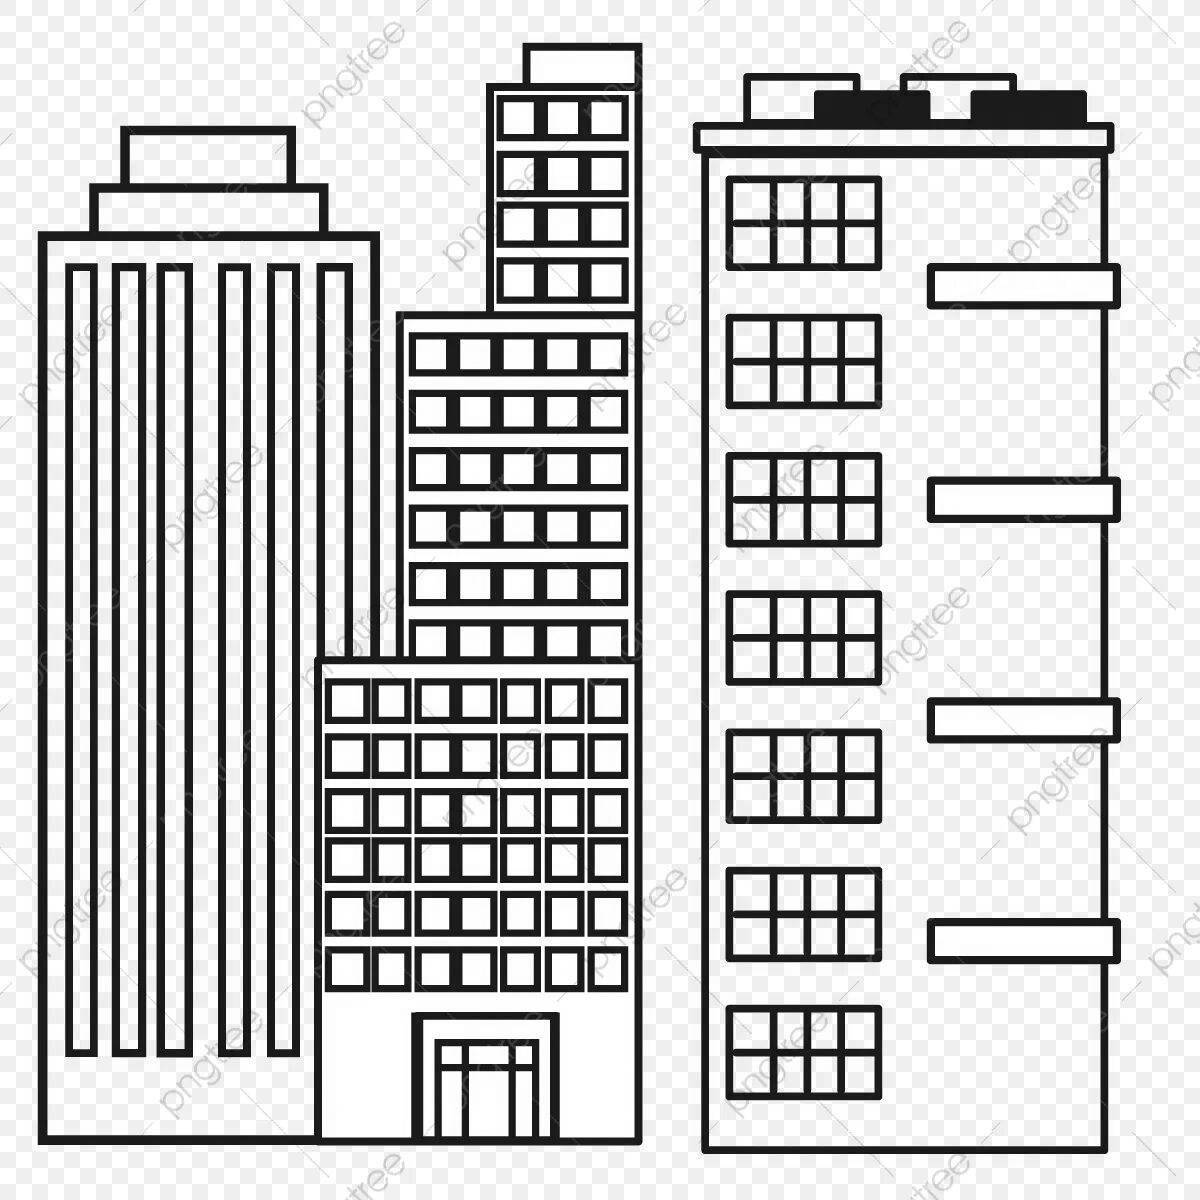 Coloring page charming high-rise building